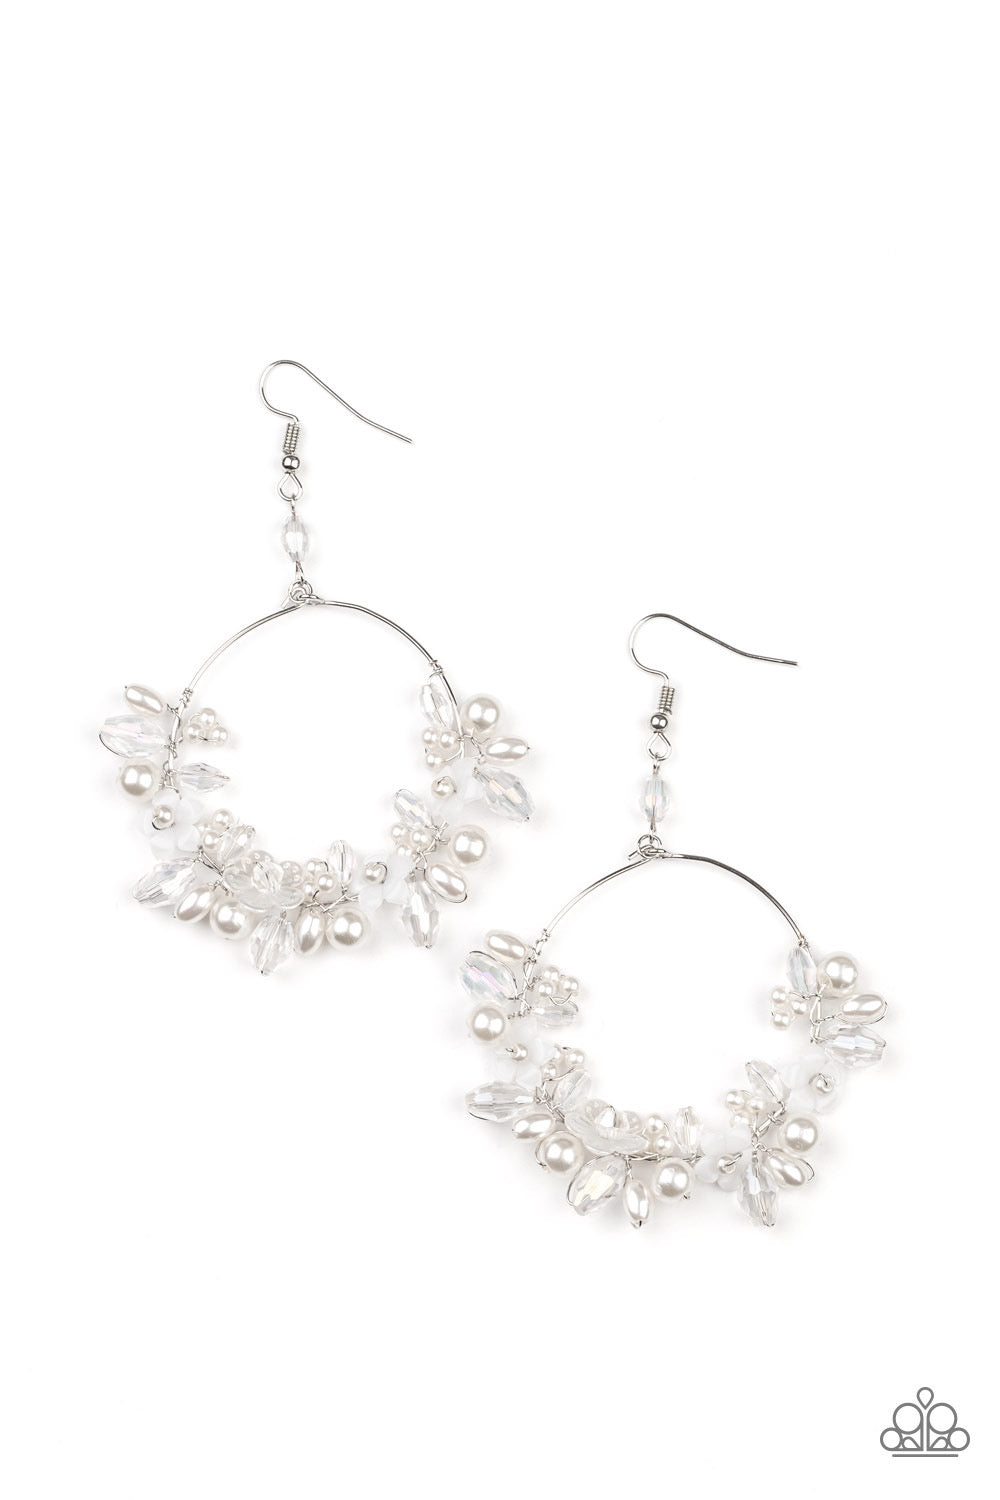 Floating Gardens - White   LOP Paparazzi earrings - Sharon’s Southern Bling 